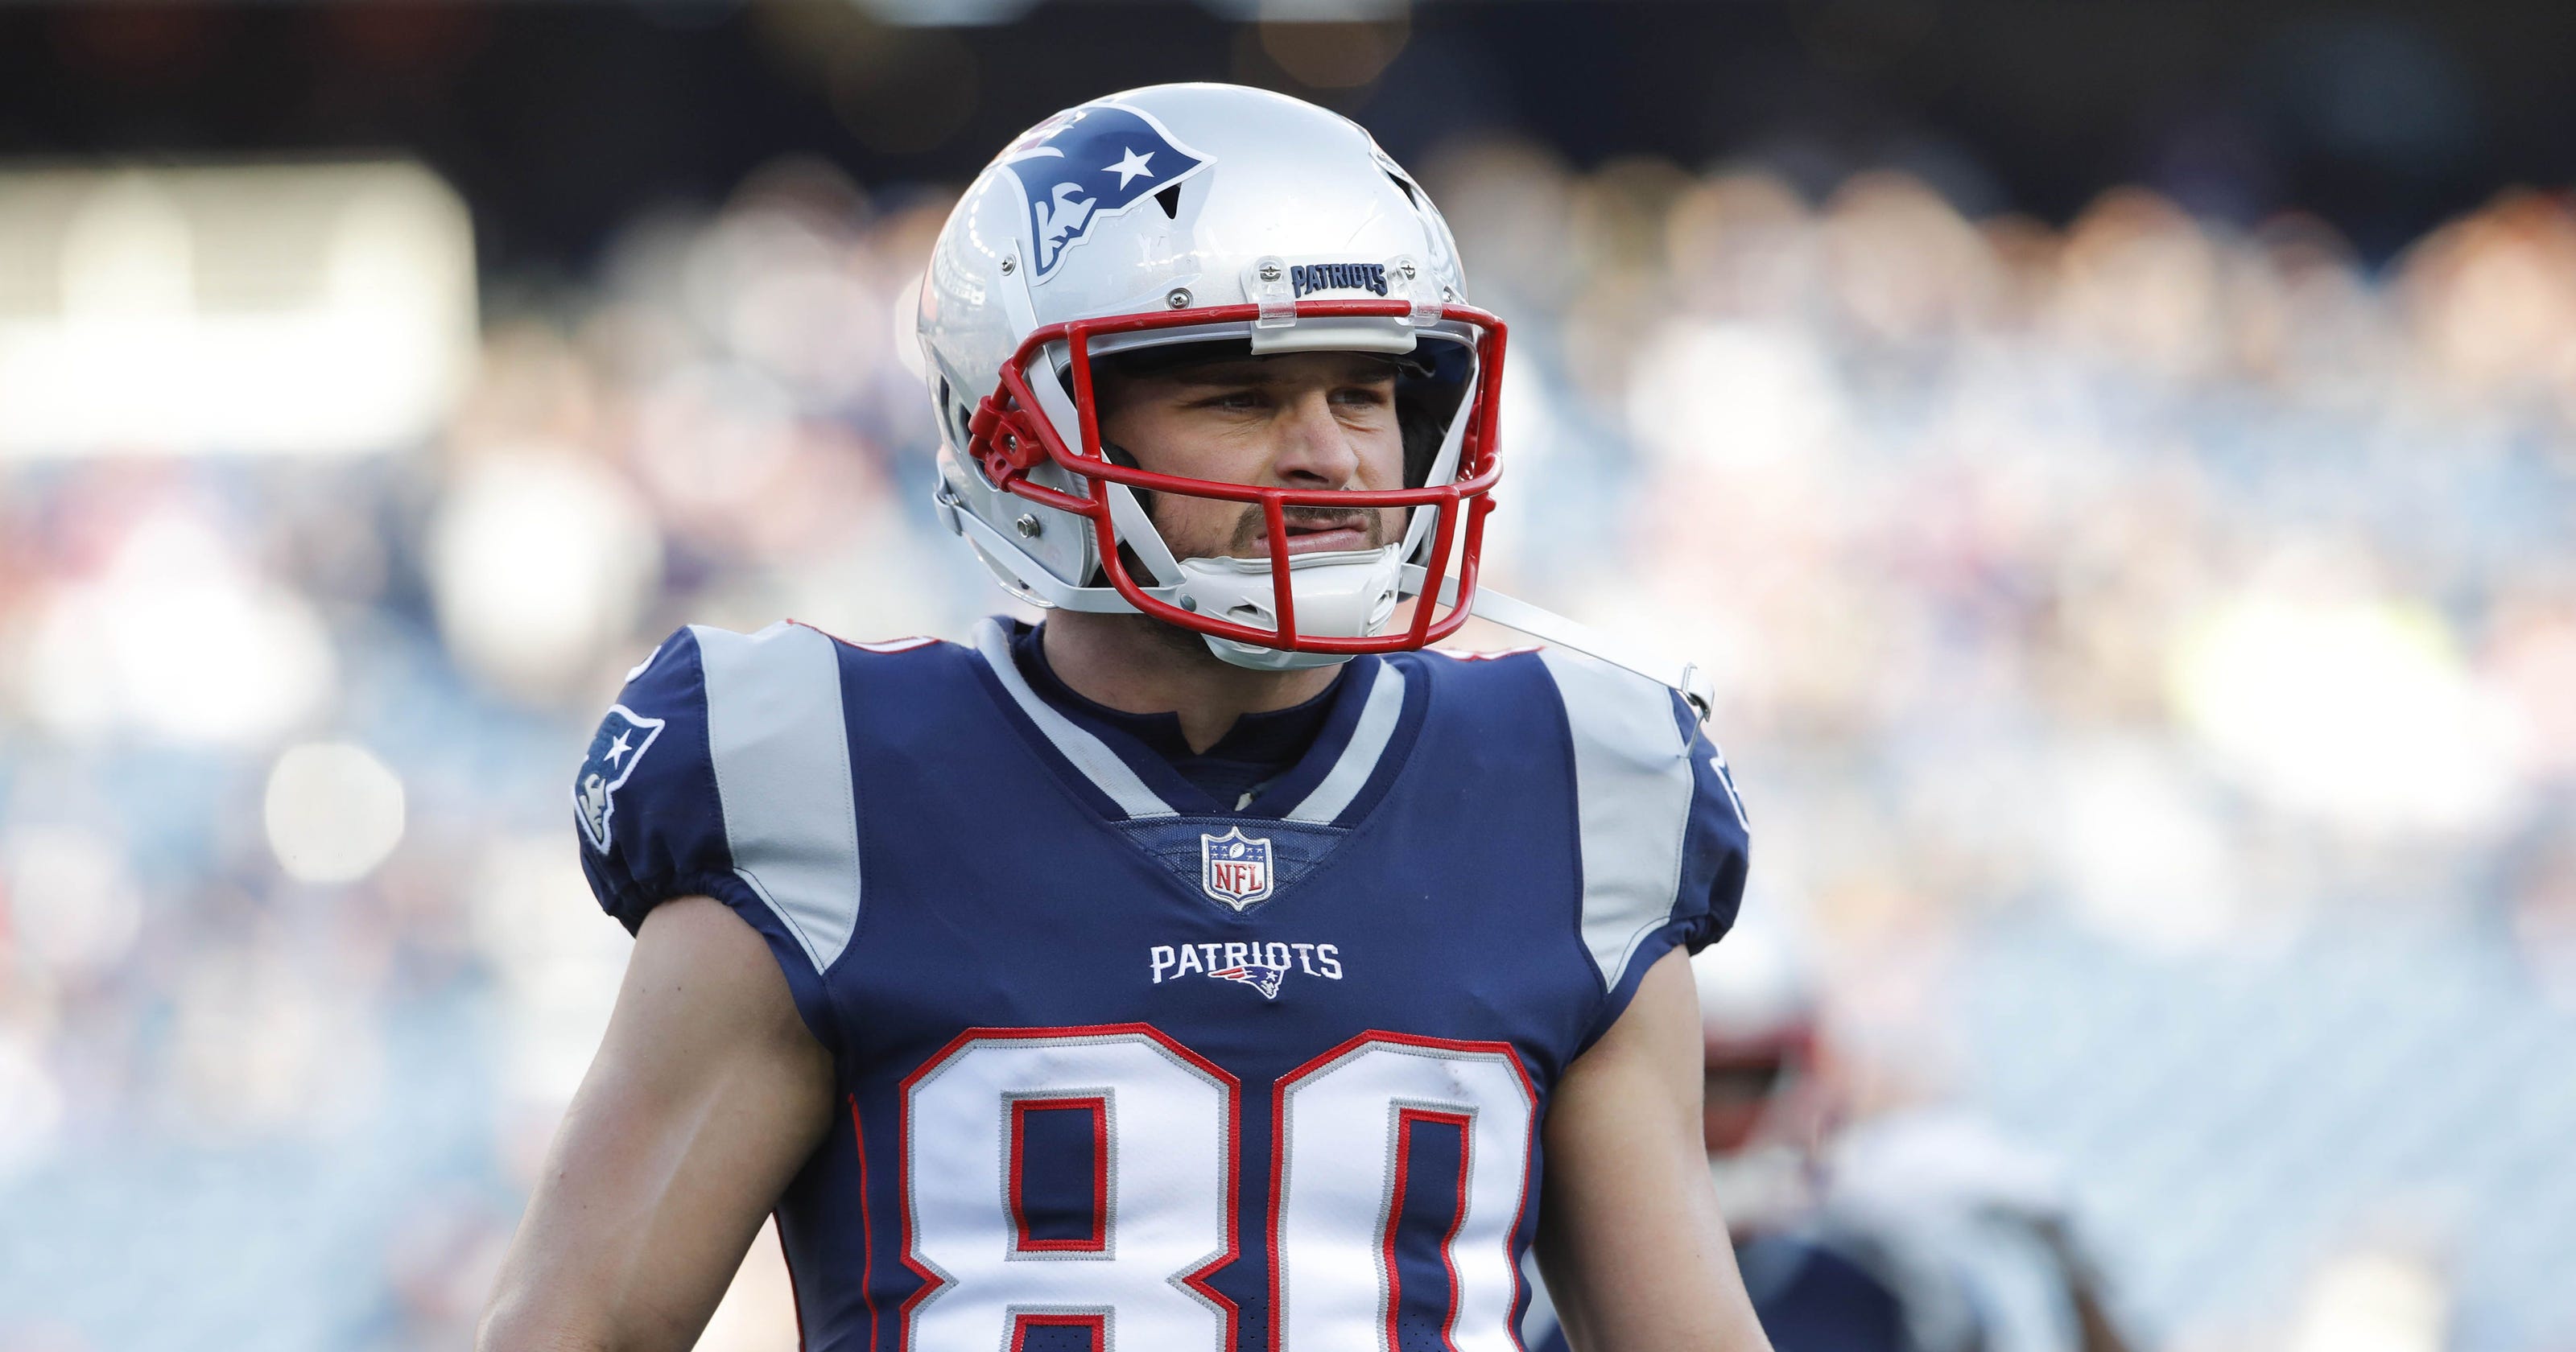 Danny Amendola expected to sign with Miami Dolphins